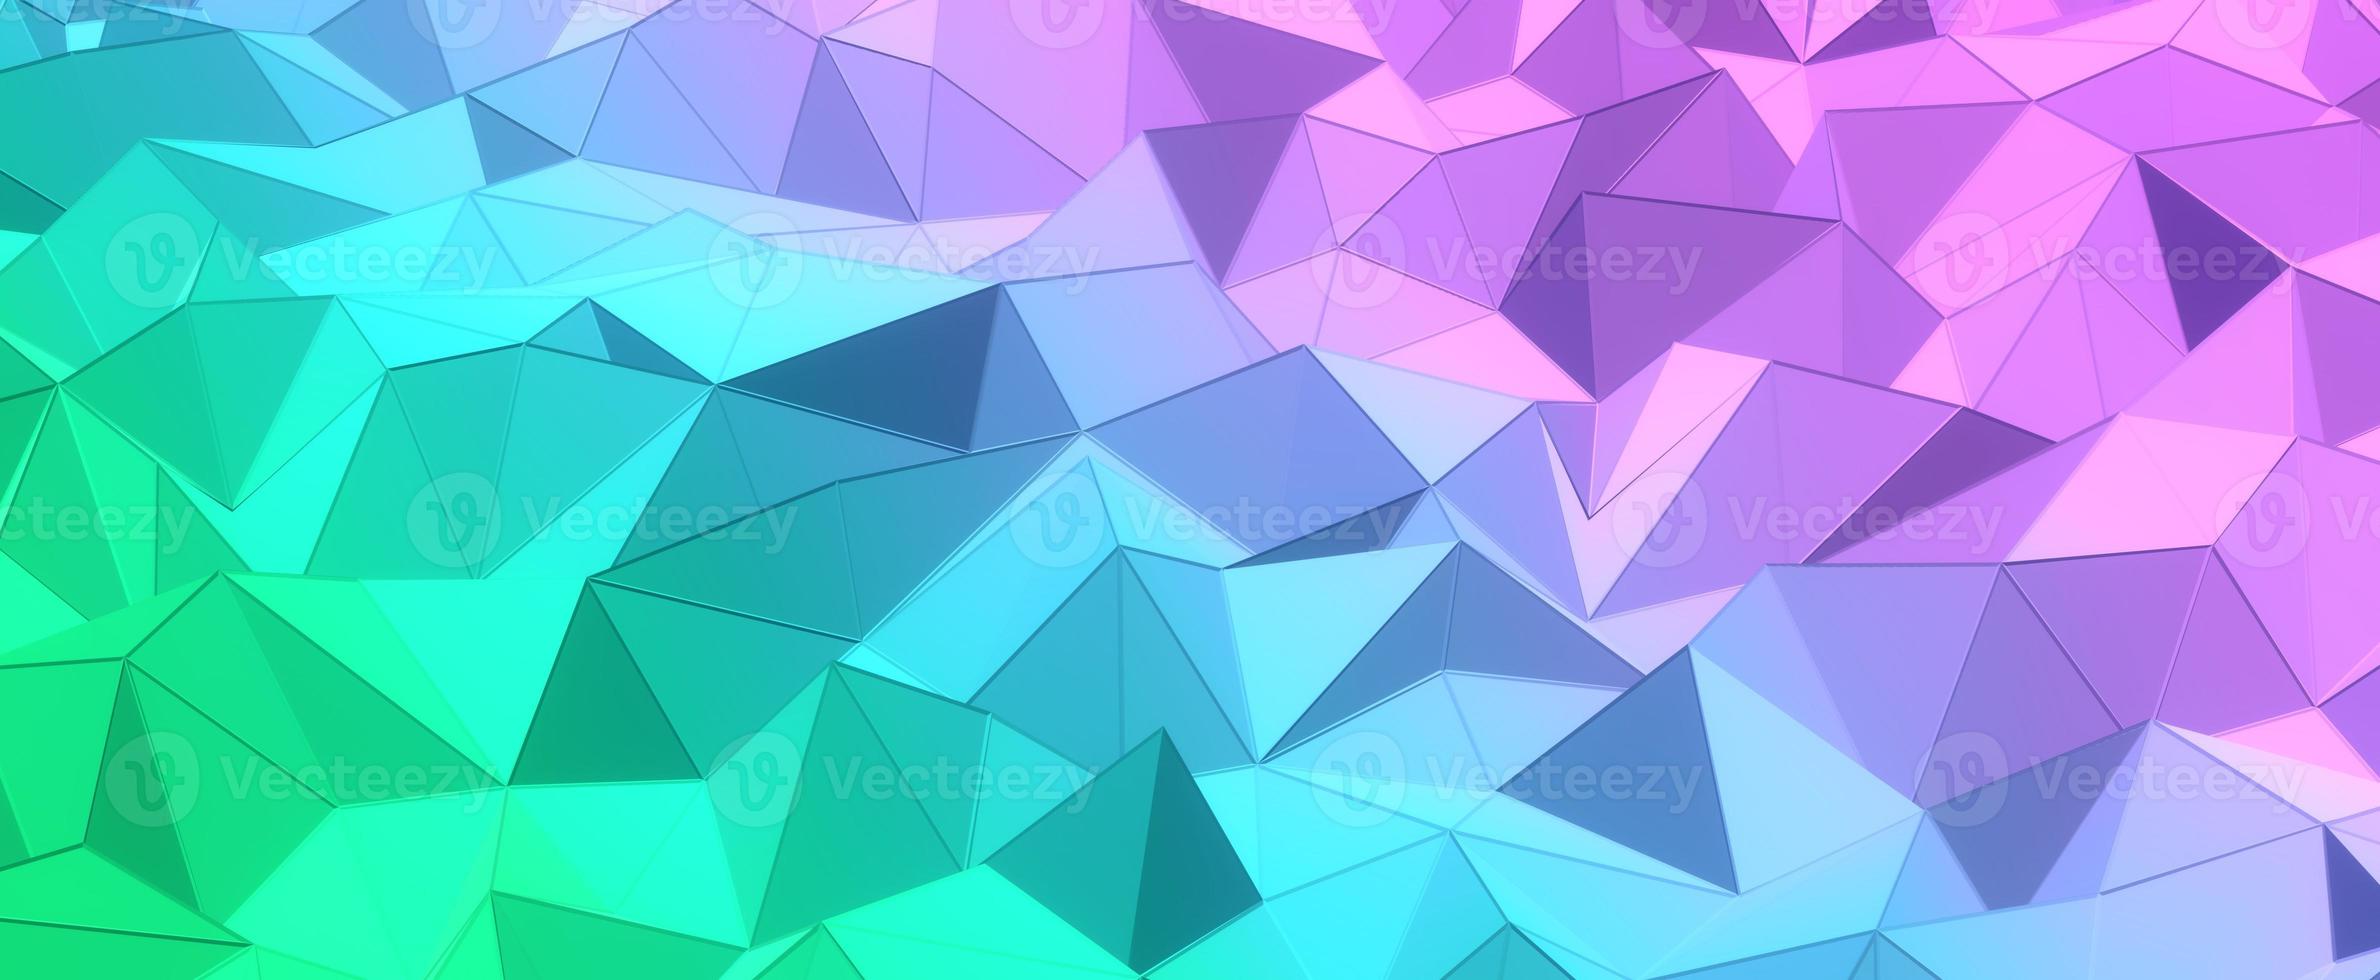 Purple crystal hills with blue gradient background. Geometric green polygon with 3d render mesh. Triangular digital textures stacked in creative formations with futuristic interior photo